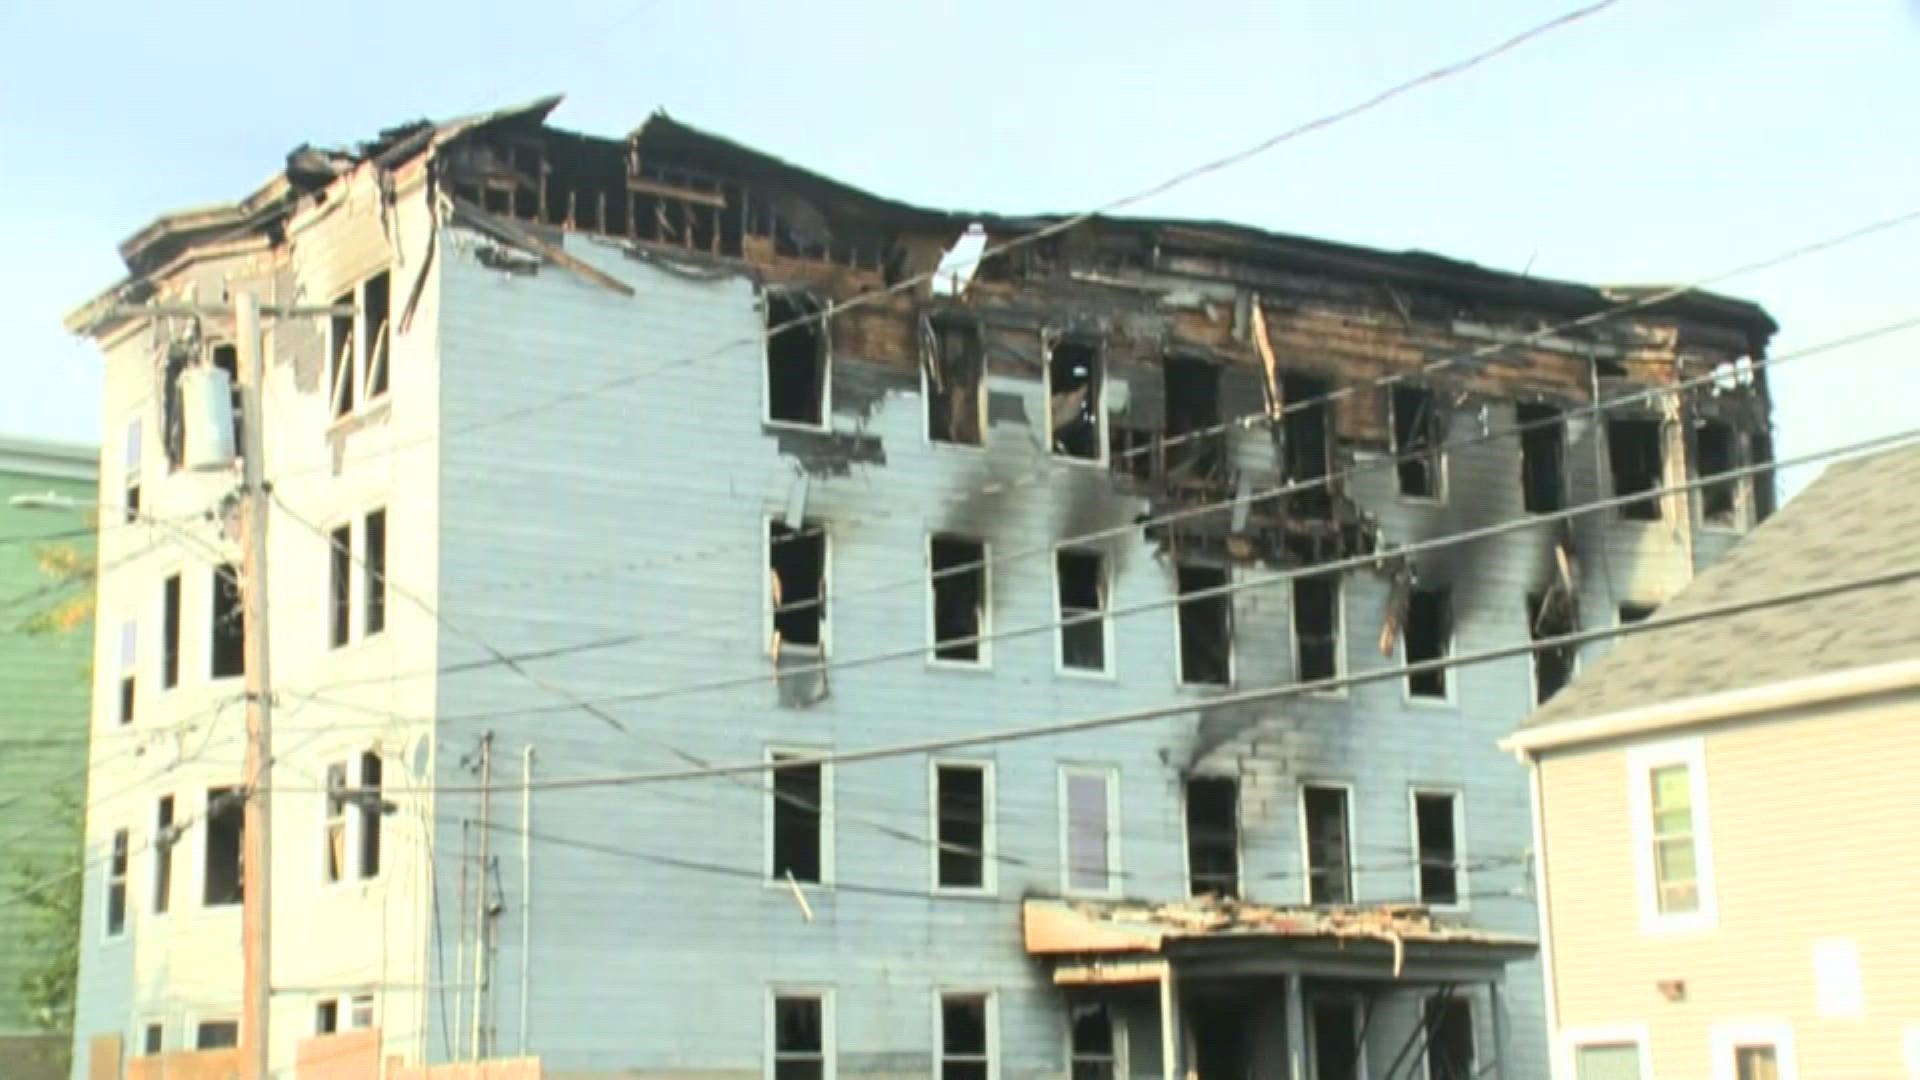 Two 13 year-olds and one 14 year-old were taken into custody on Monday in connection with the Lewiston fire that displaced several families and killed one man.